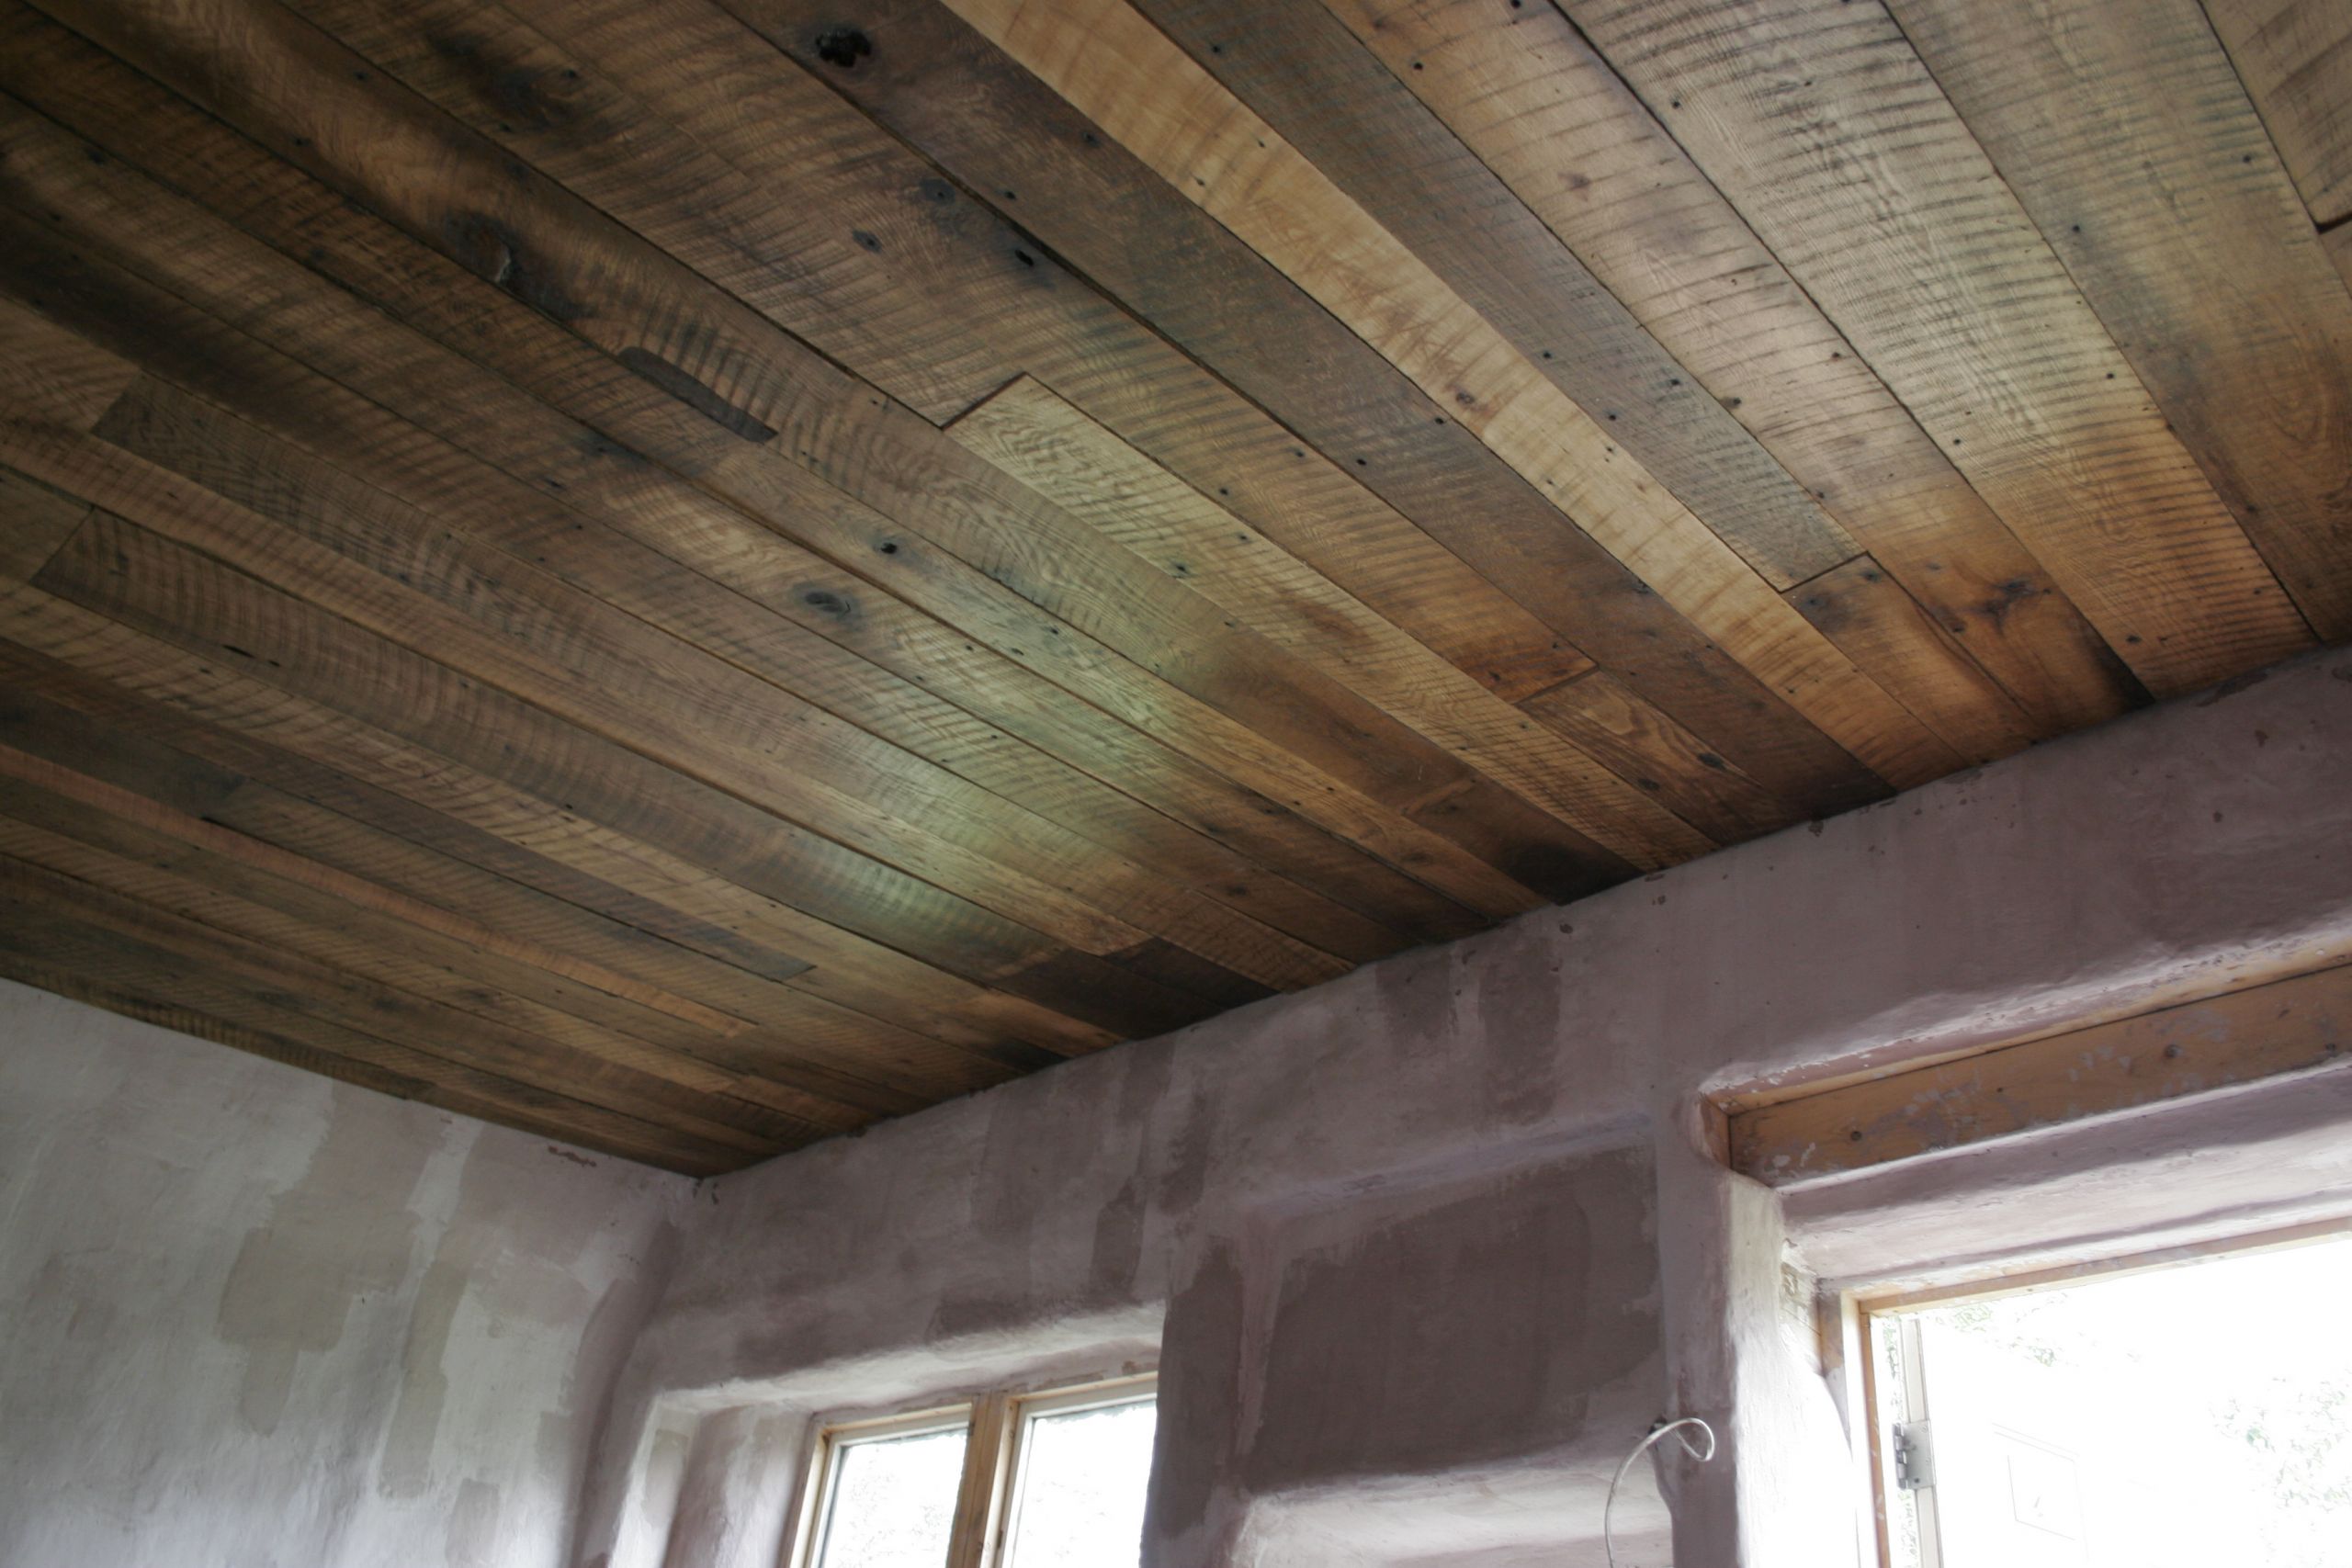 DIY Wood Ceiling Panels
 A Rustic Barn Board Ceiling for the Cottage